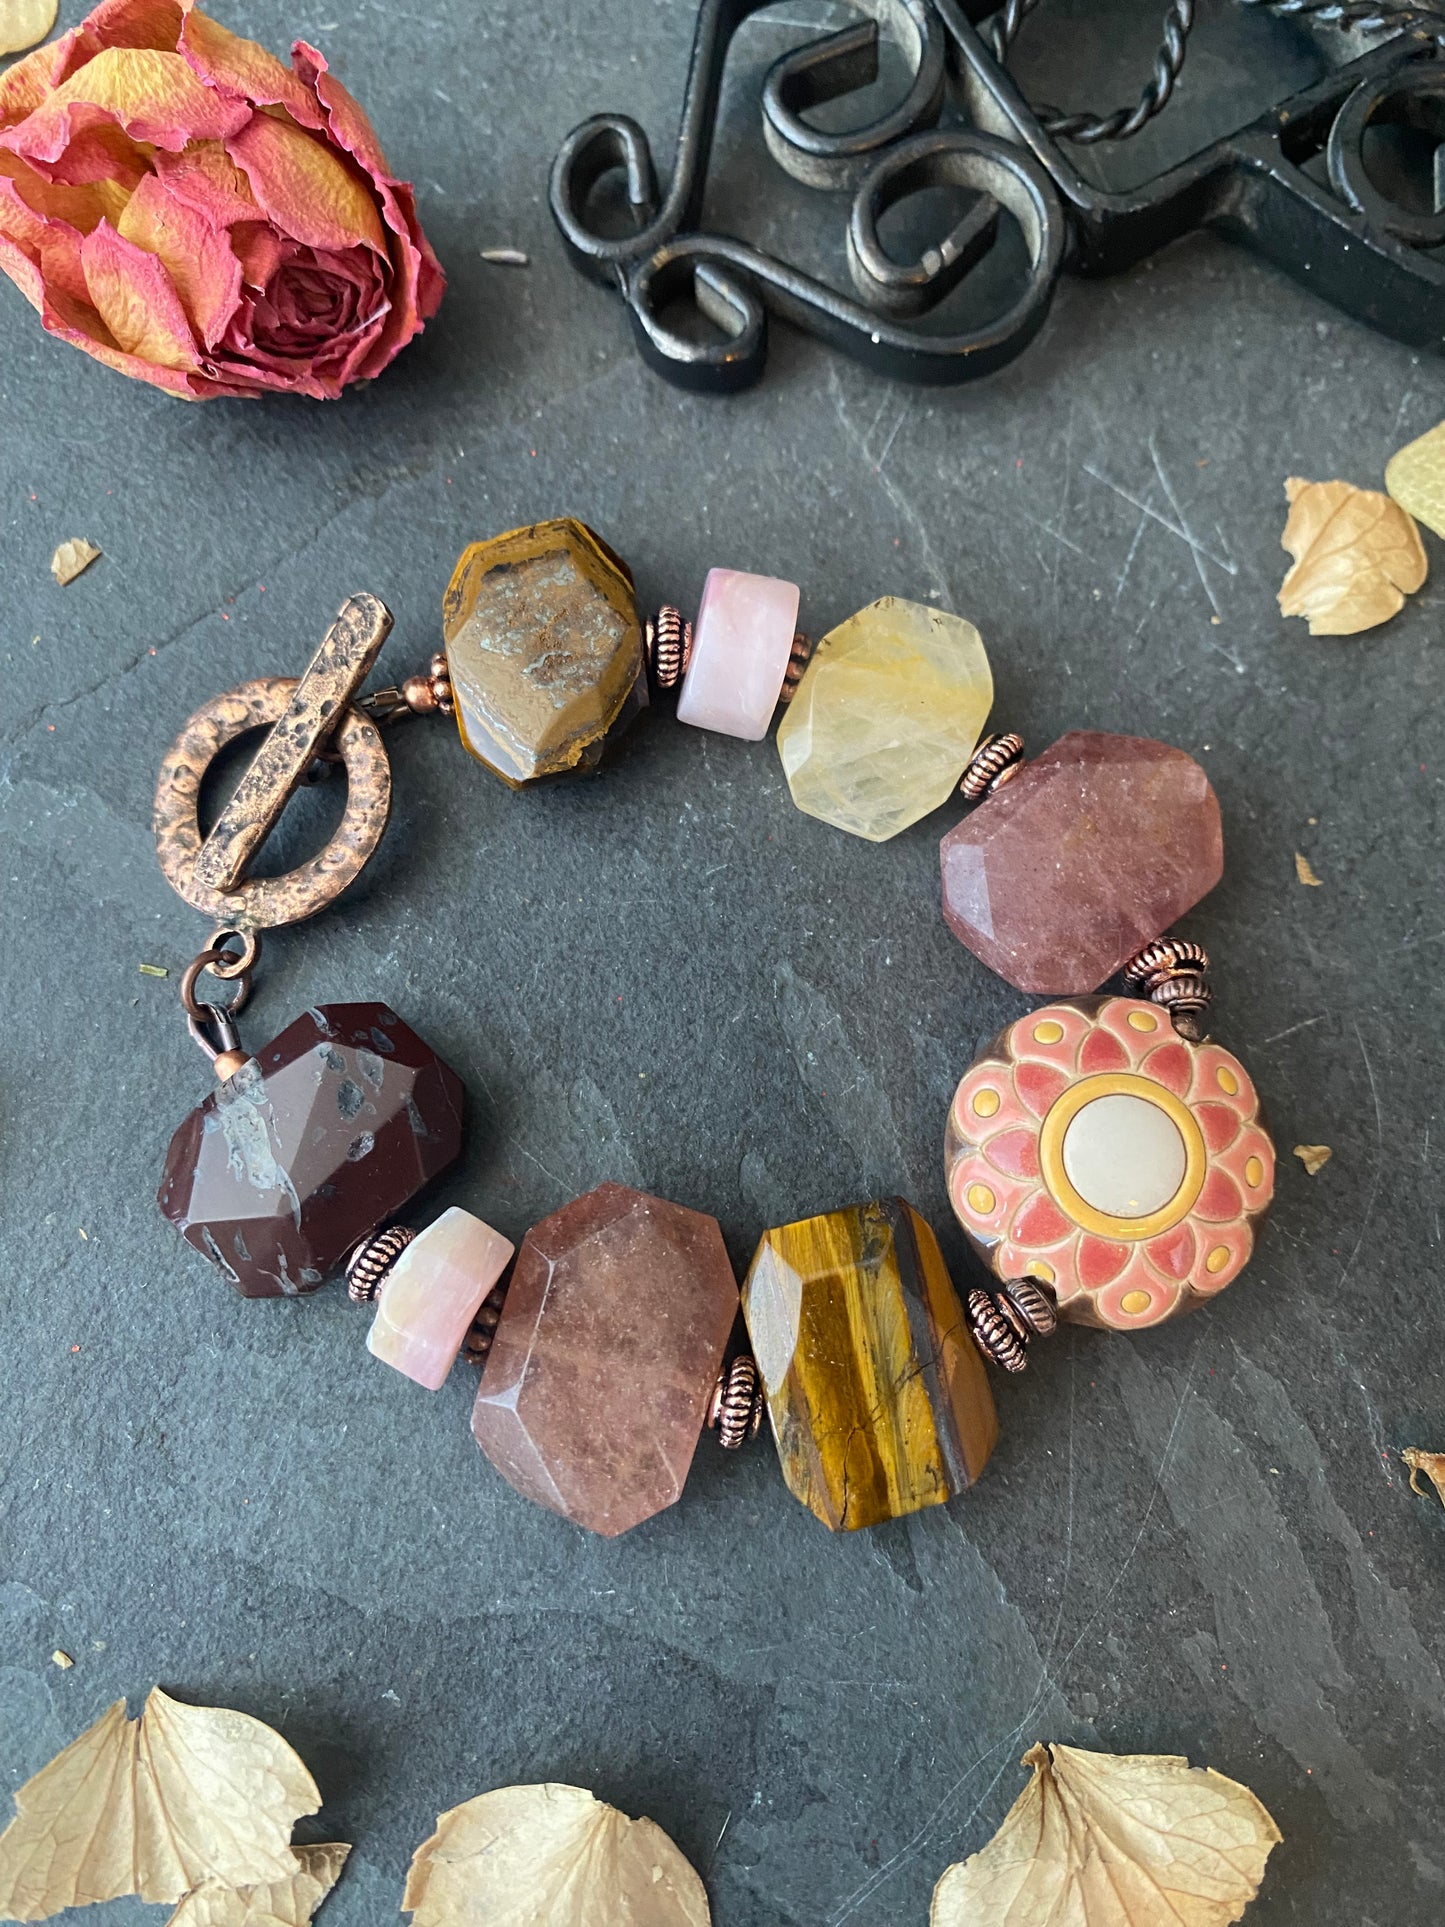 Flower ceramic focal bead, brown and pink with yellow stone, copper metal, bracelet